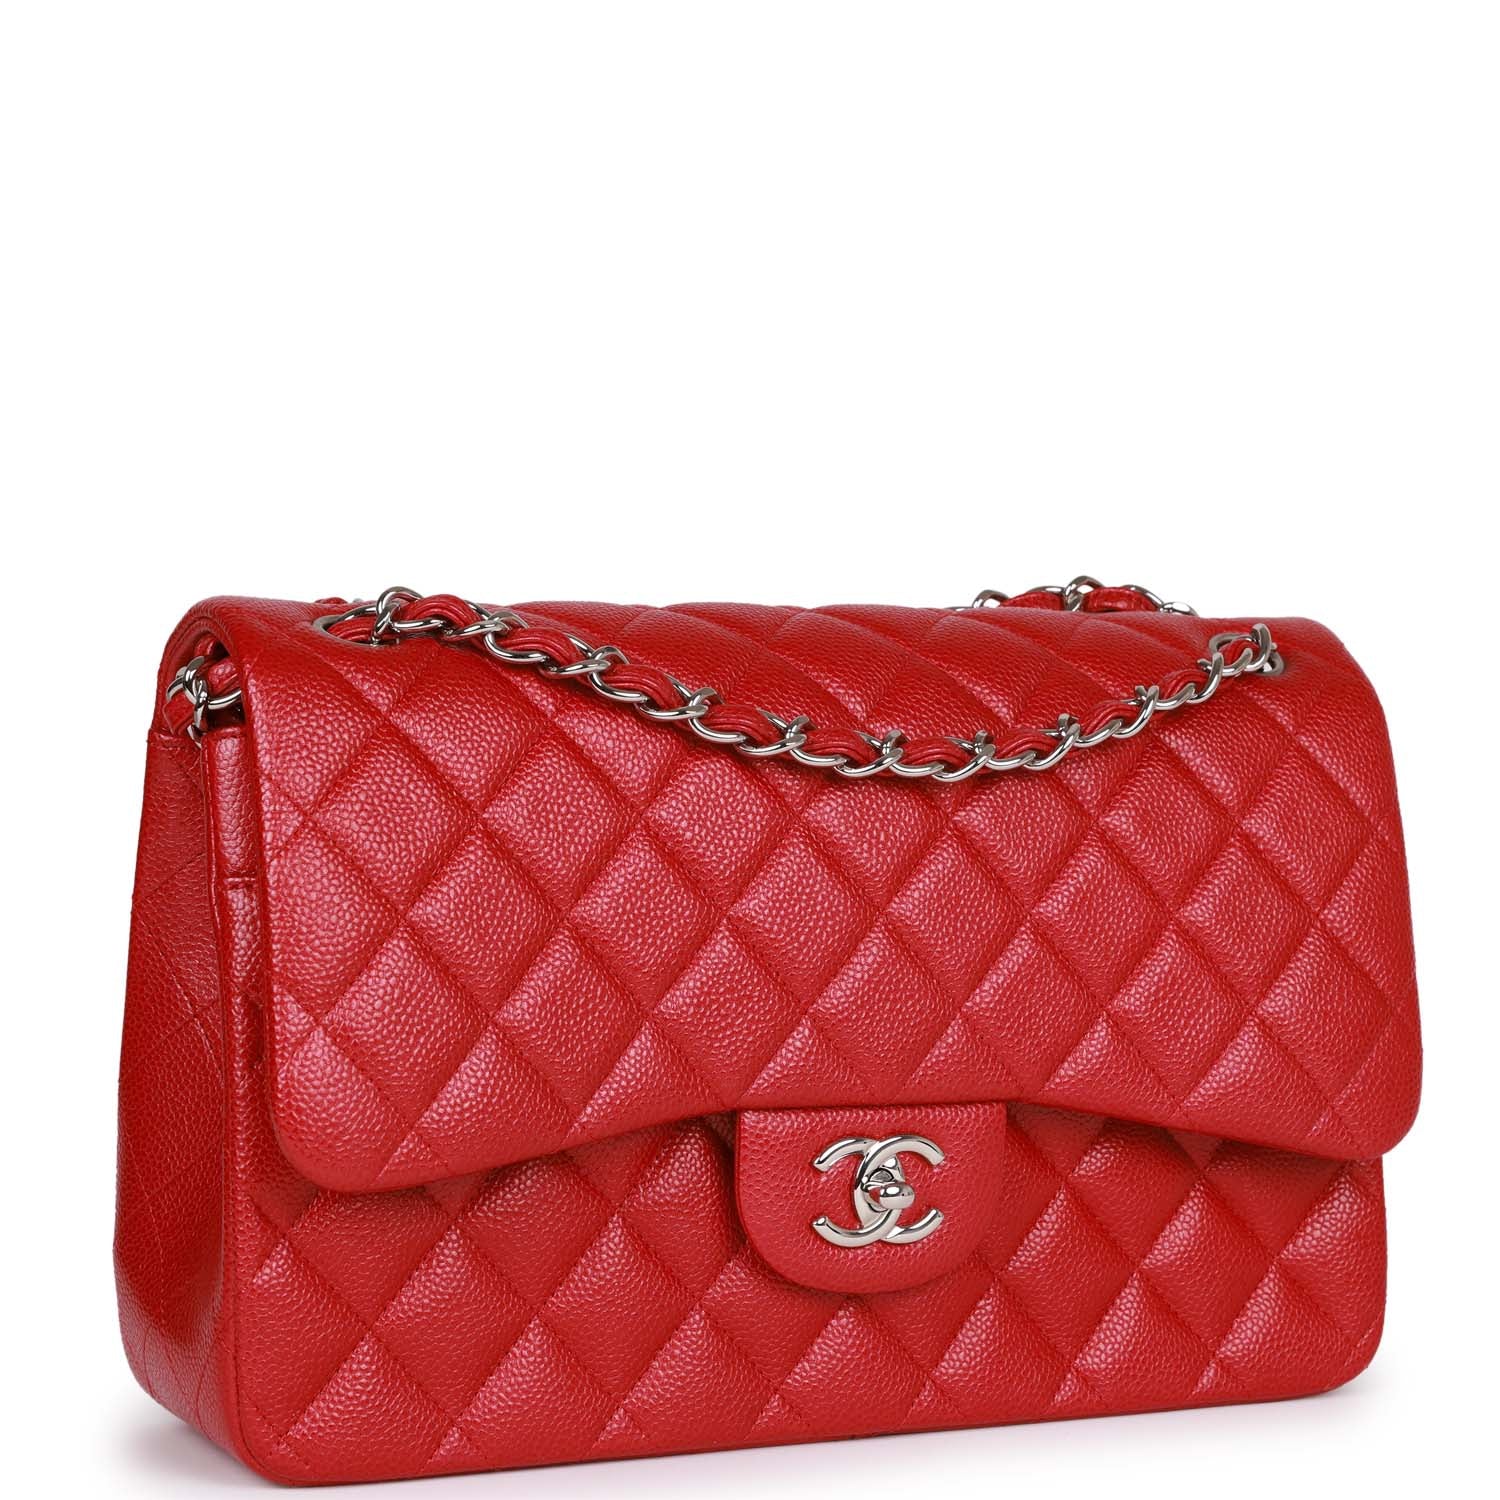 Pre-owned Chanel Jumbo Classic Double Flap Bag Metallic Red Caviar Sil ...